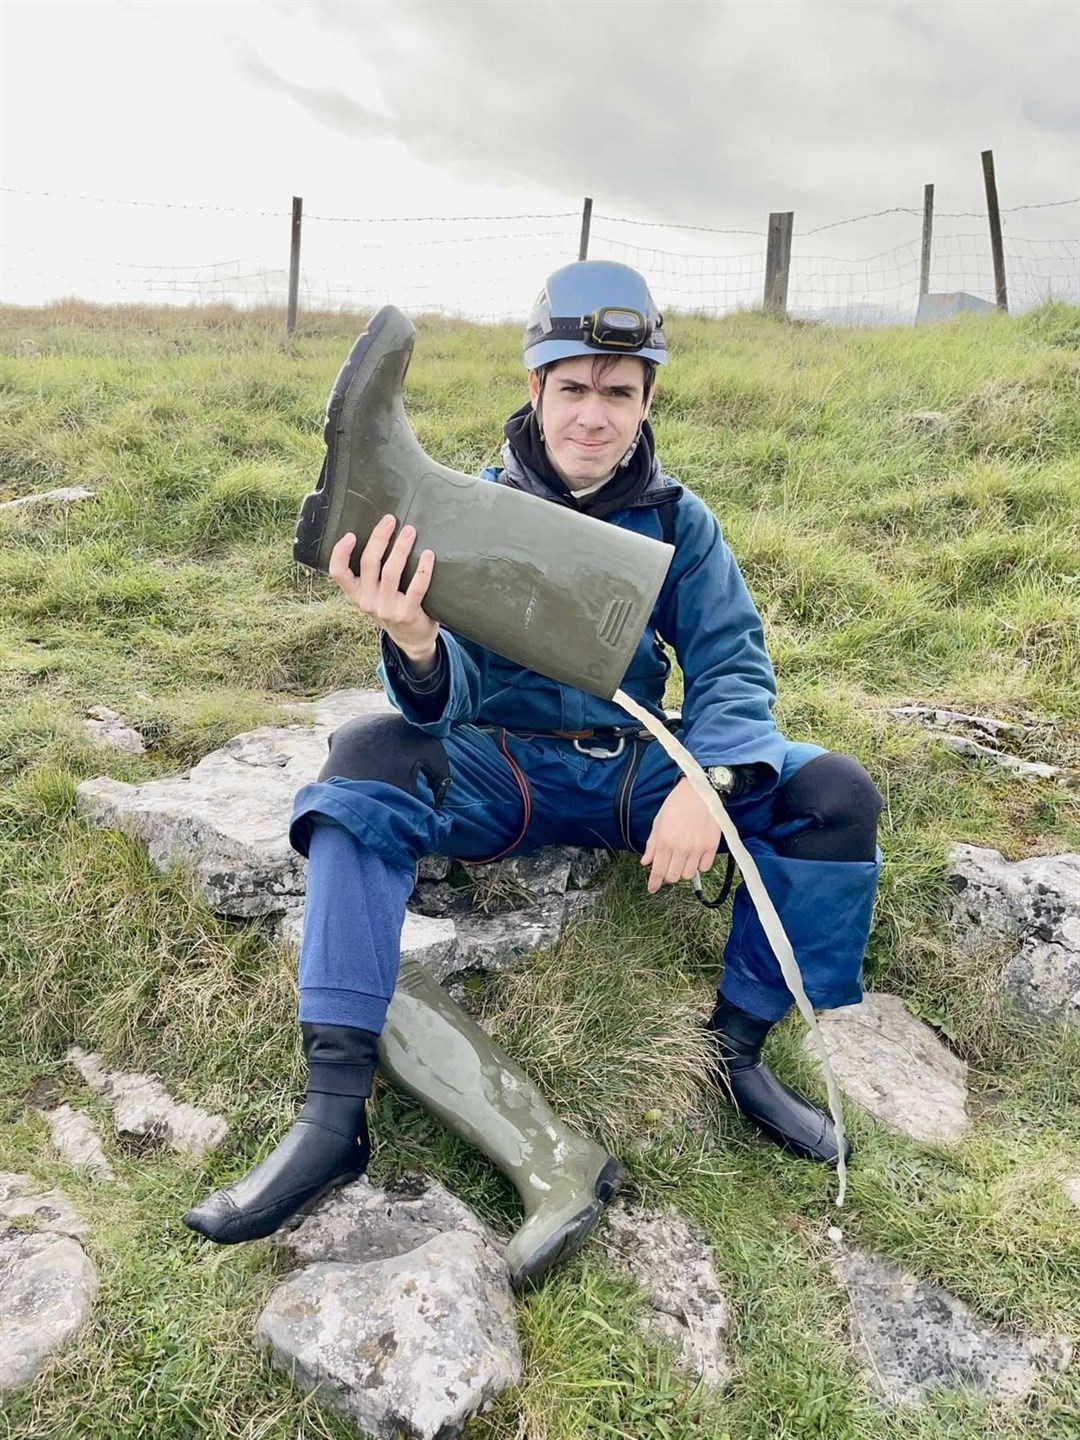 Cadet Lance Corporal Lucus Macrae, from 1st Battalion The Highlanders’ Alness Detachment, gets the water out of his wellies after his caving experience in Lancaster